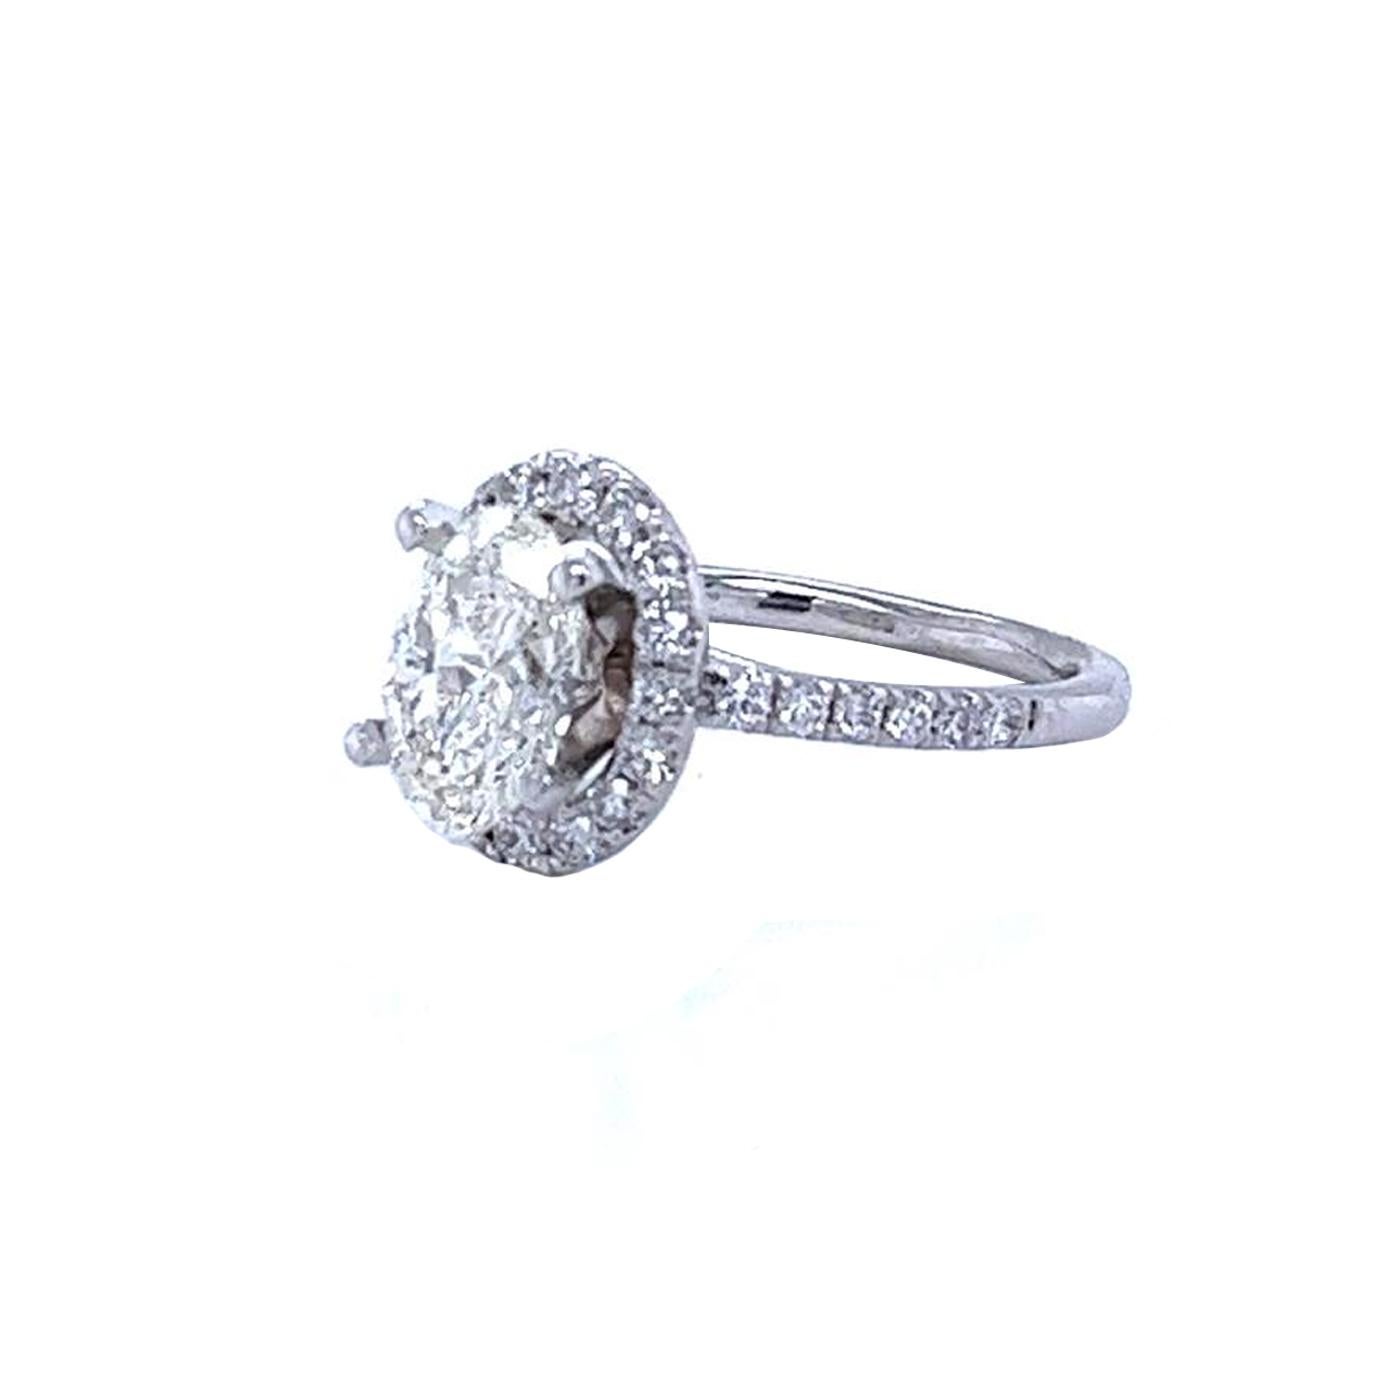 This Diamond ring is accompanied by a GIA Certified with a graded report certifying that the 1.51-carat oval diamond ring has a natural brilliant cut Si1 clarity I Color and is made in Platinum. This lovely ring is perfect for that special someone